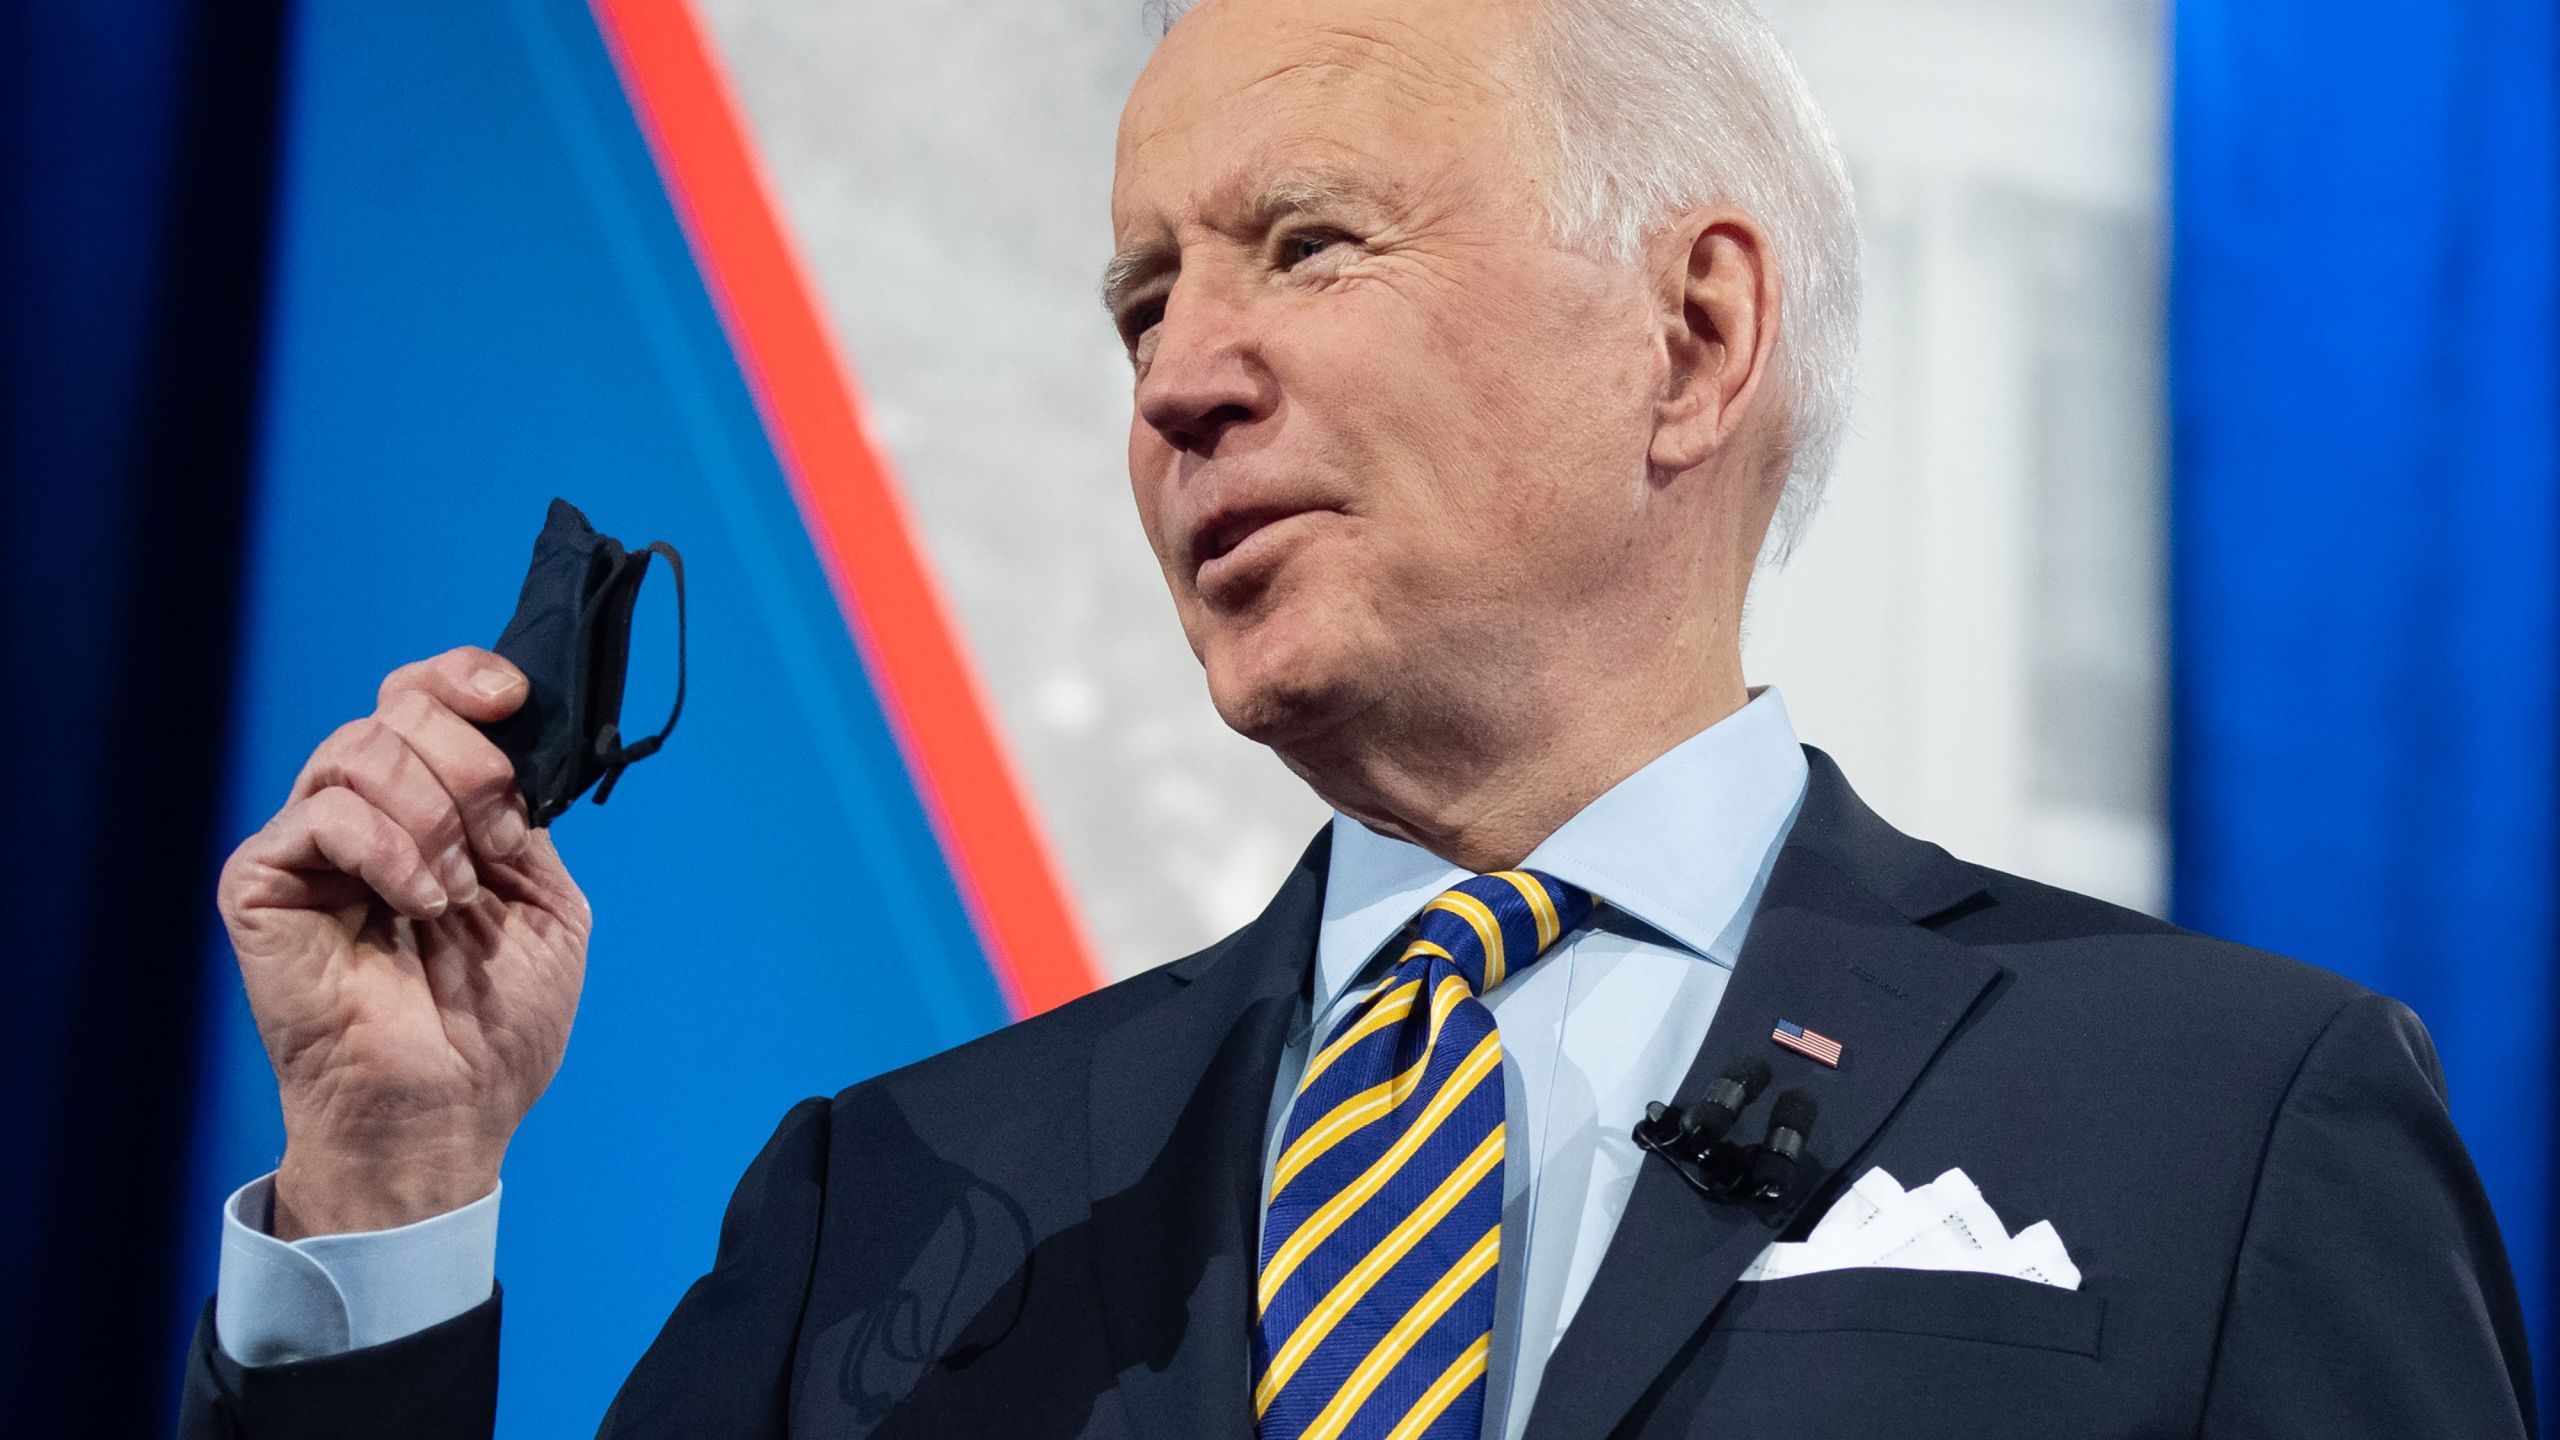 Biden Vows A Majority Of K 8 Schools Will Open 5 Days A Week By The End Of His First 100 Days